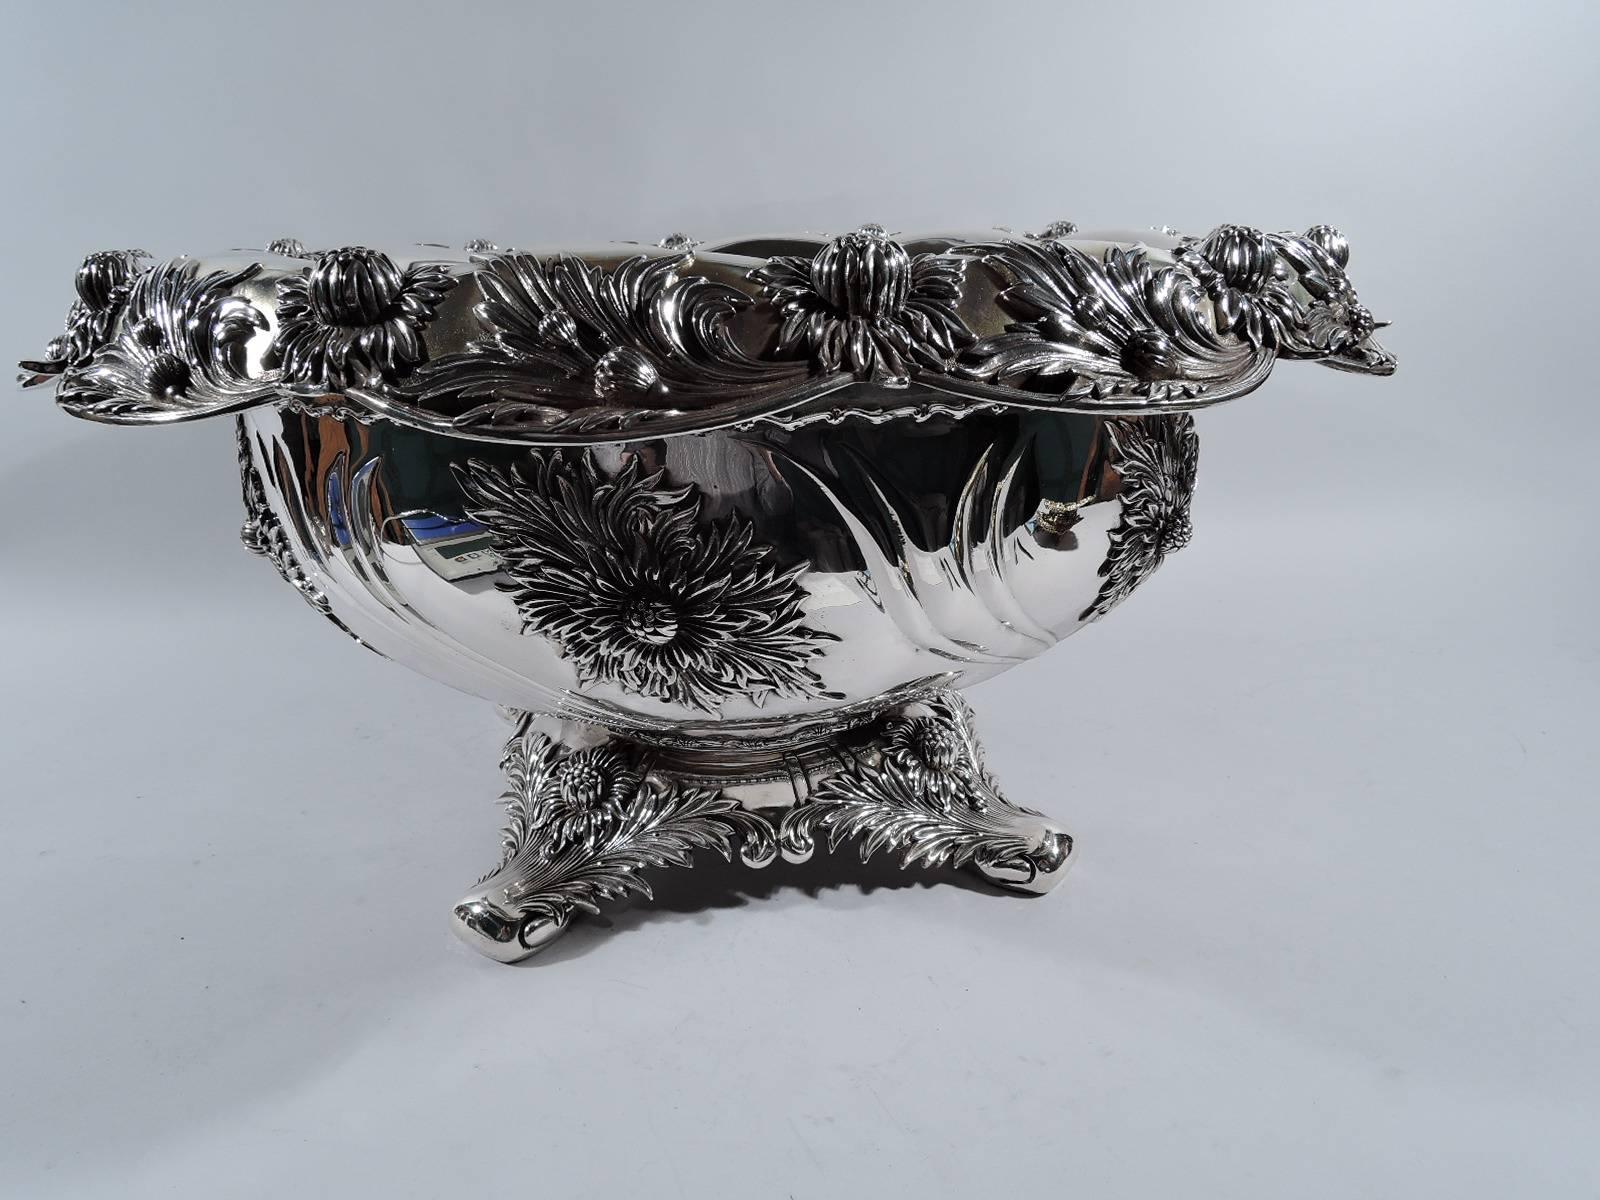 Very desirable sterling silver punchbowl and ladle in Chrysanthemum pattern. Made by Tiffany & Co. in New York. The bowl has curved sides and turned-down scalloped rim. Raised base terminating in four volute scrolls. Chrysanthemums applied to rim,